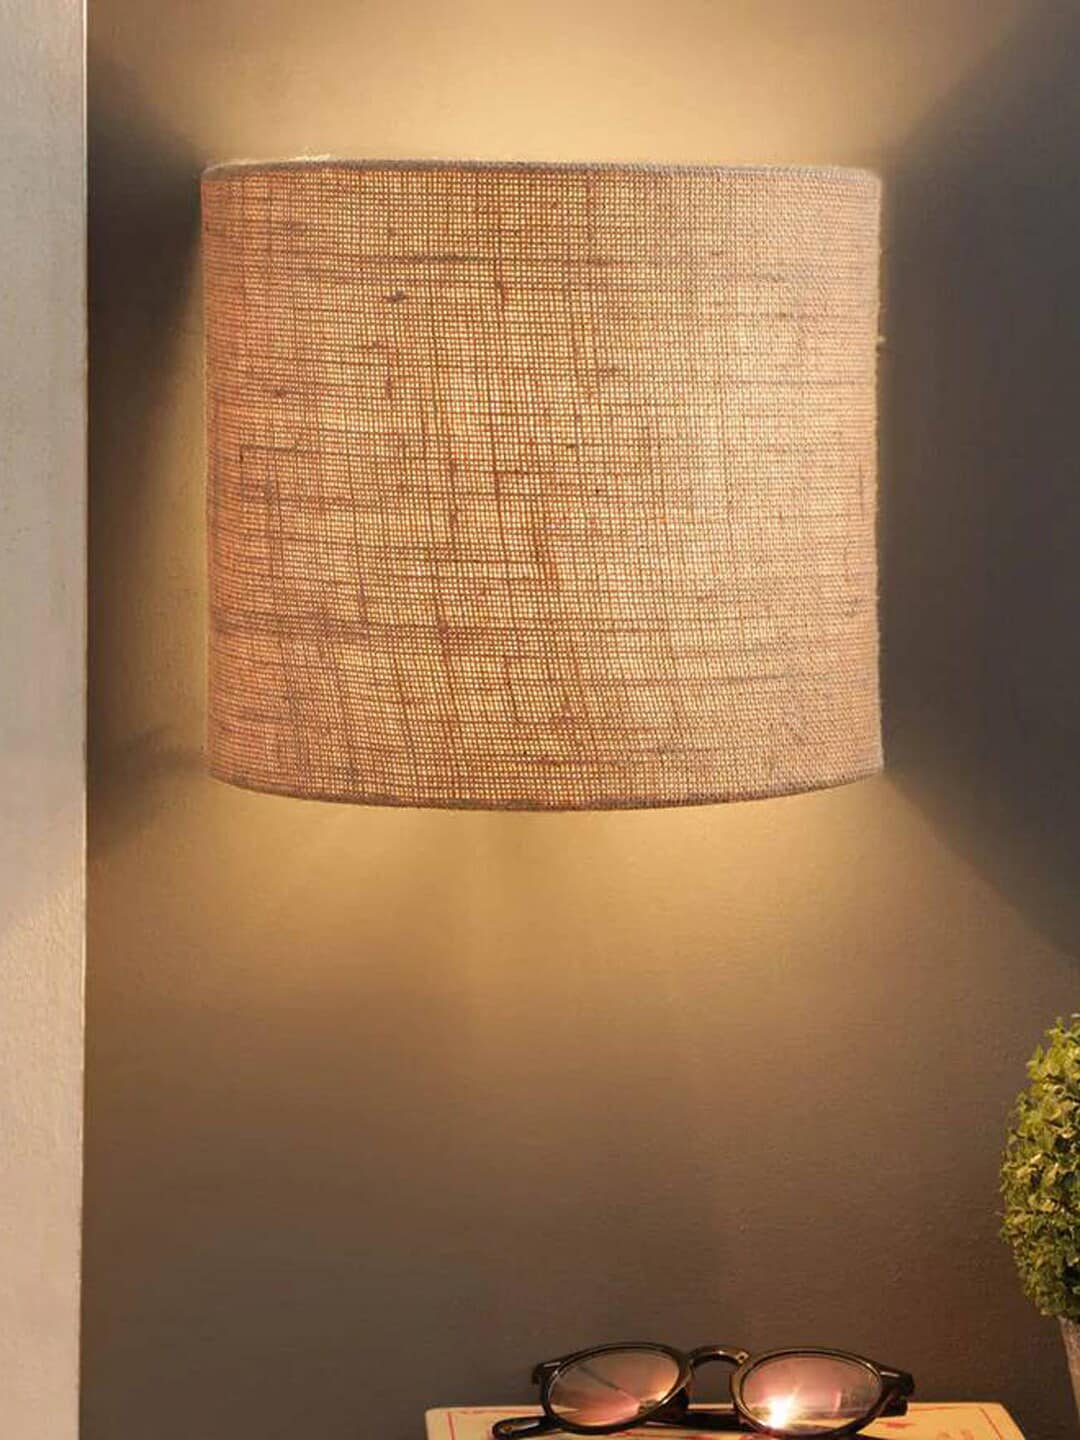 Foziq Brown Textured Wall Lamps Price in India